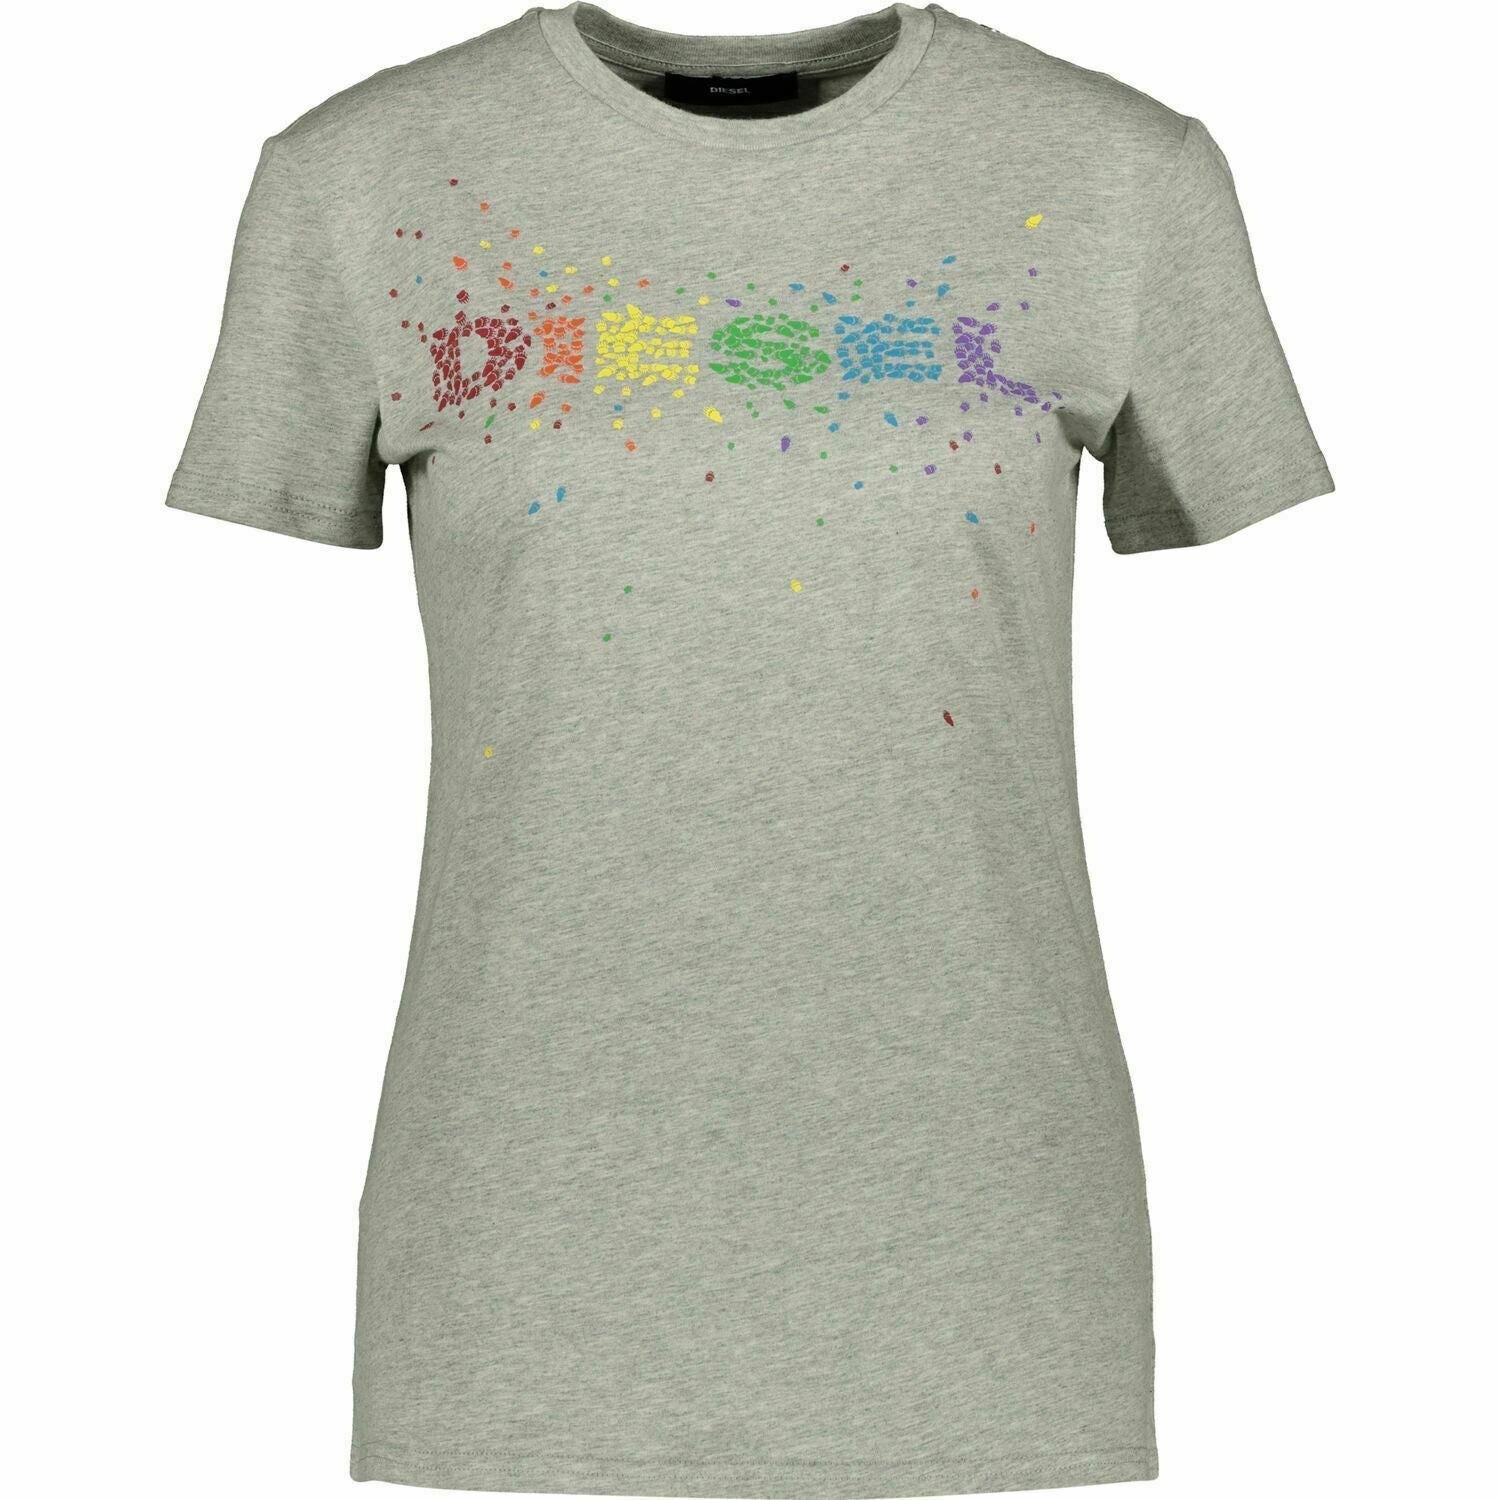 Genuine Diesel Womens Grey Marl T Sily T-Shirt Size Small